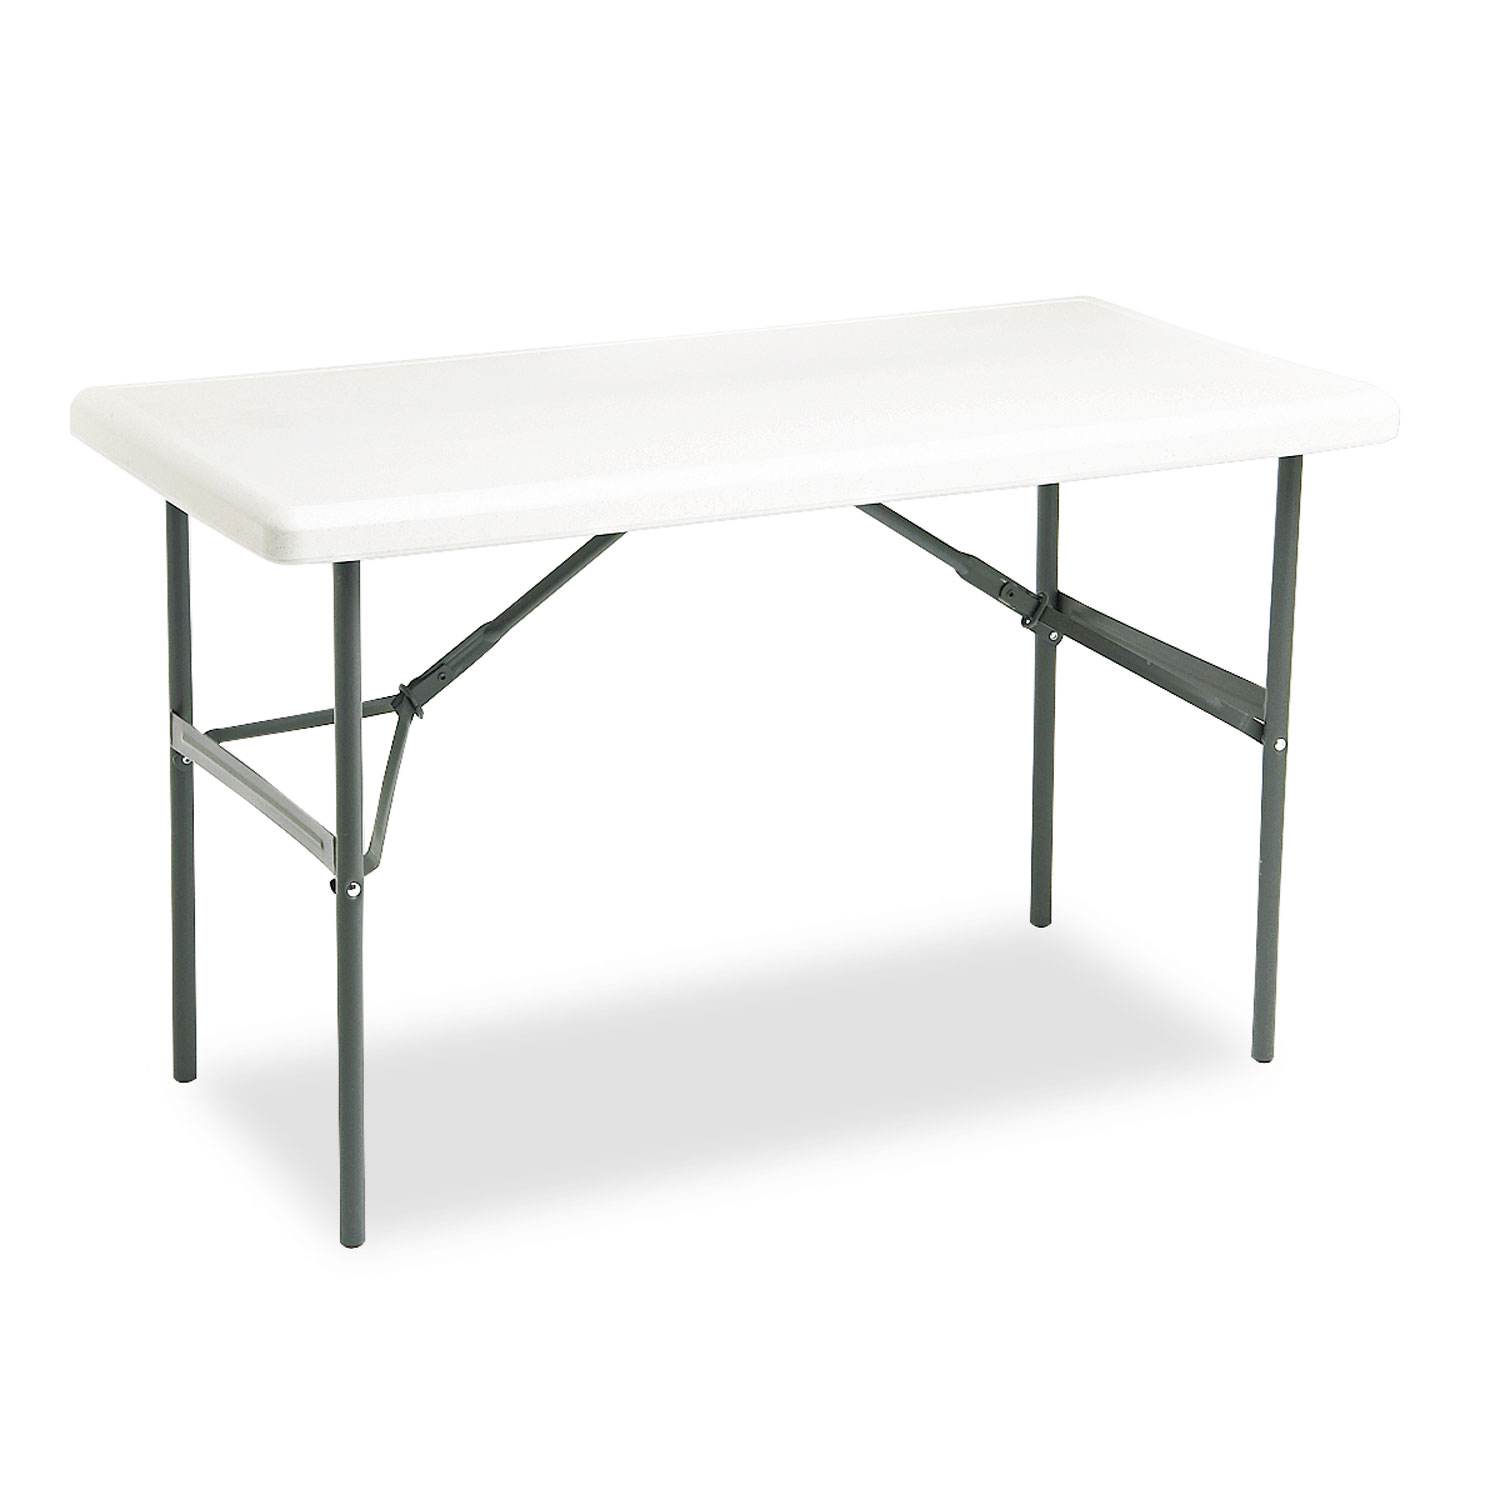  Iceberg 65203 IndestrucTables Too 1200 Series Folding Table, 48w x 24d x 29h, Platinum (ICE65203) 